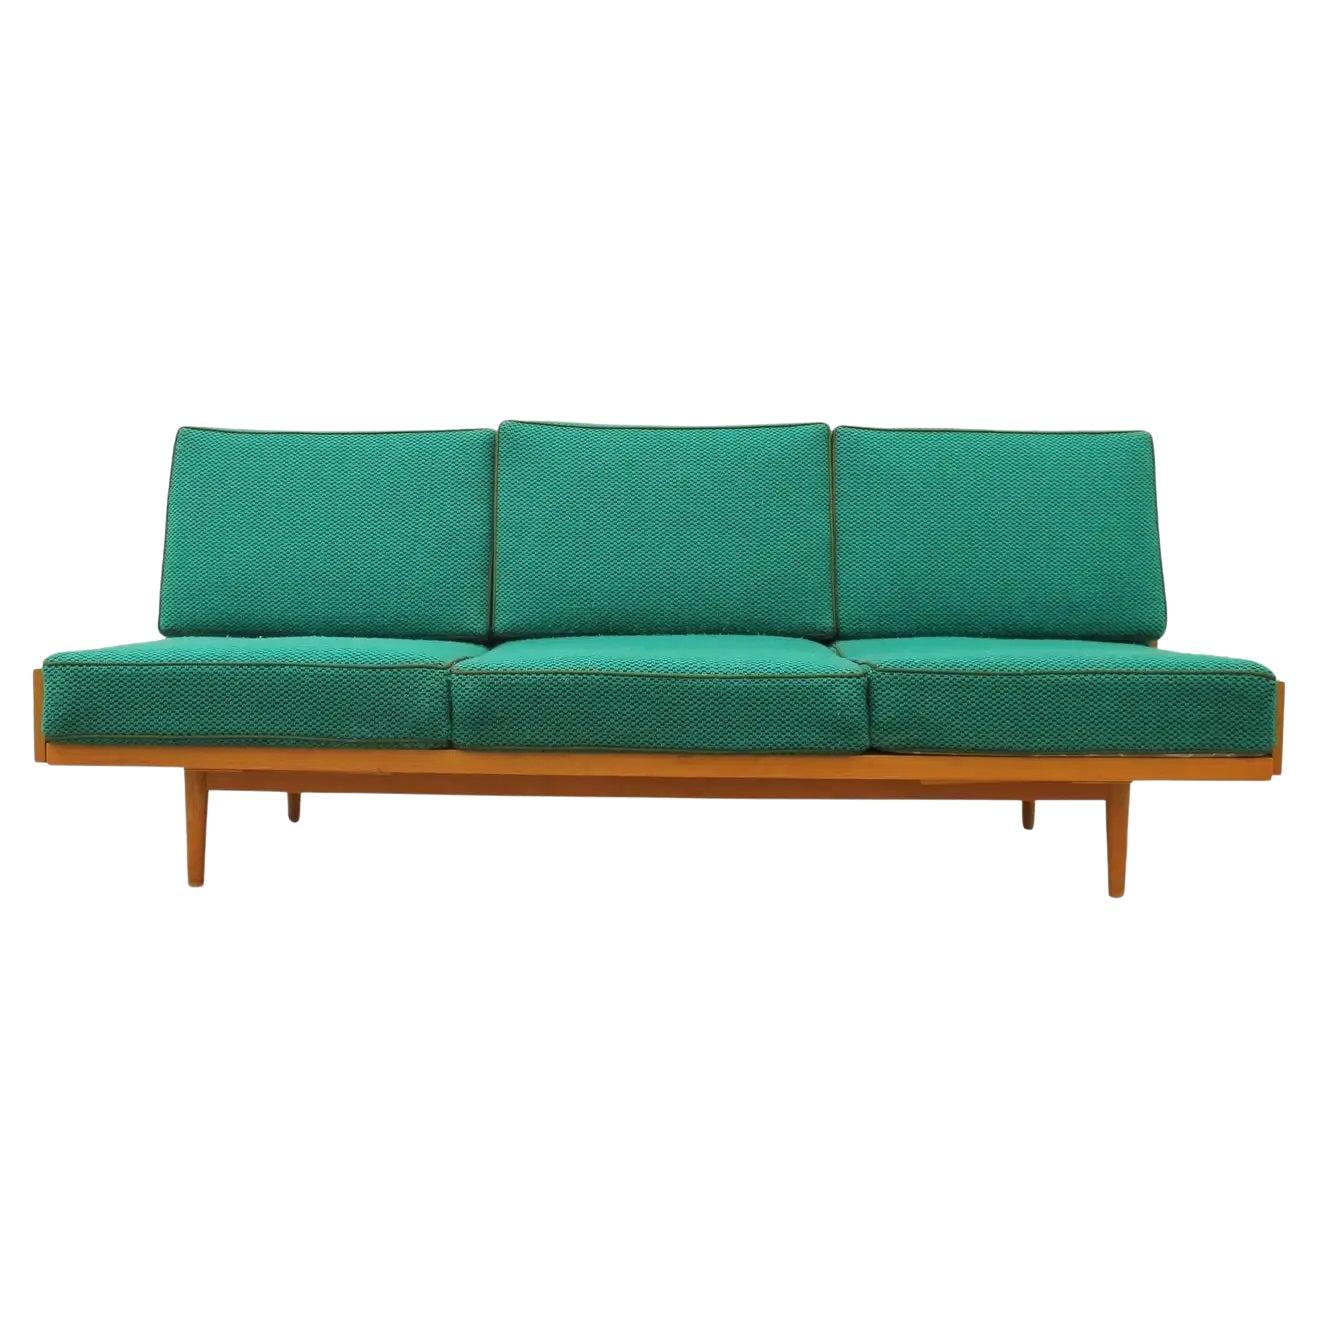 Midcentury sofa bed, made in the former Czechoslovakia in the 1970s. The sofa has a beechwood structure, it´s in very good condition, shows slight signs of age and using.

Lenght: 200 cm

Height: 78 cm

Depth: 85 cm

Sleeping area: 128 x 196